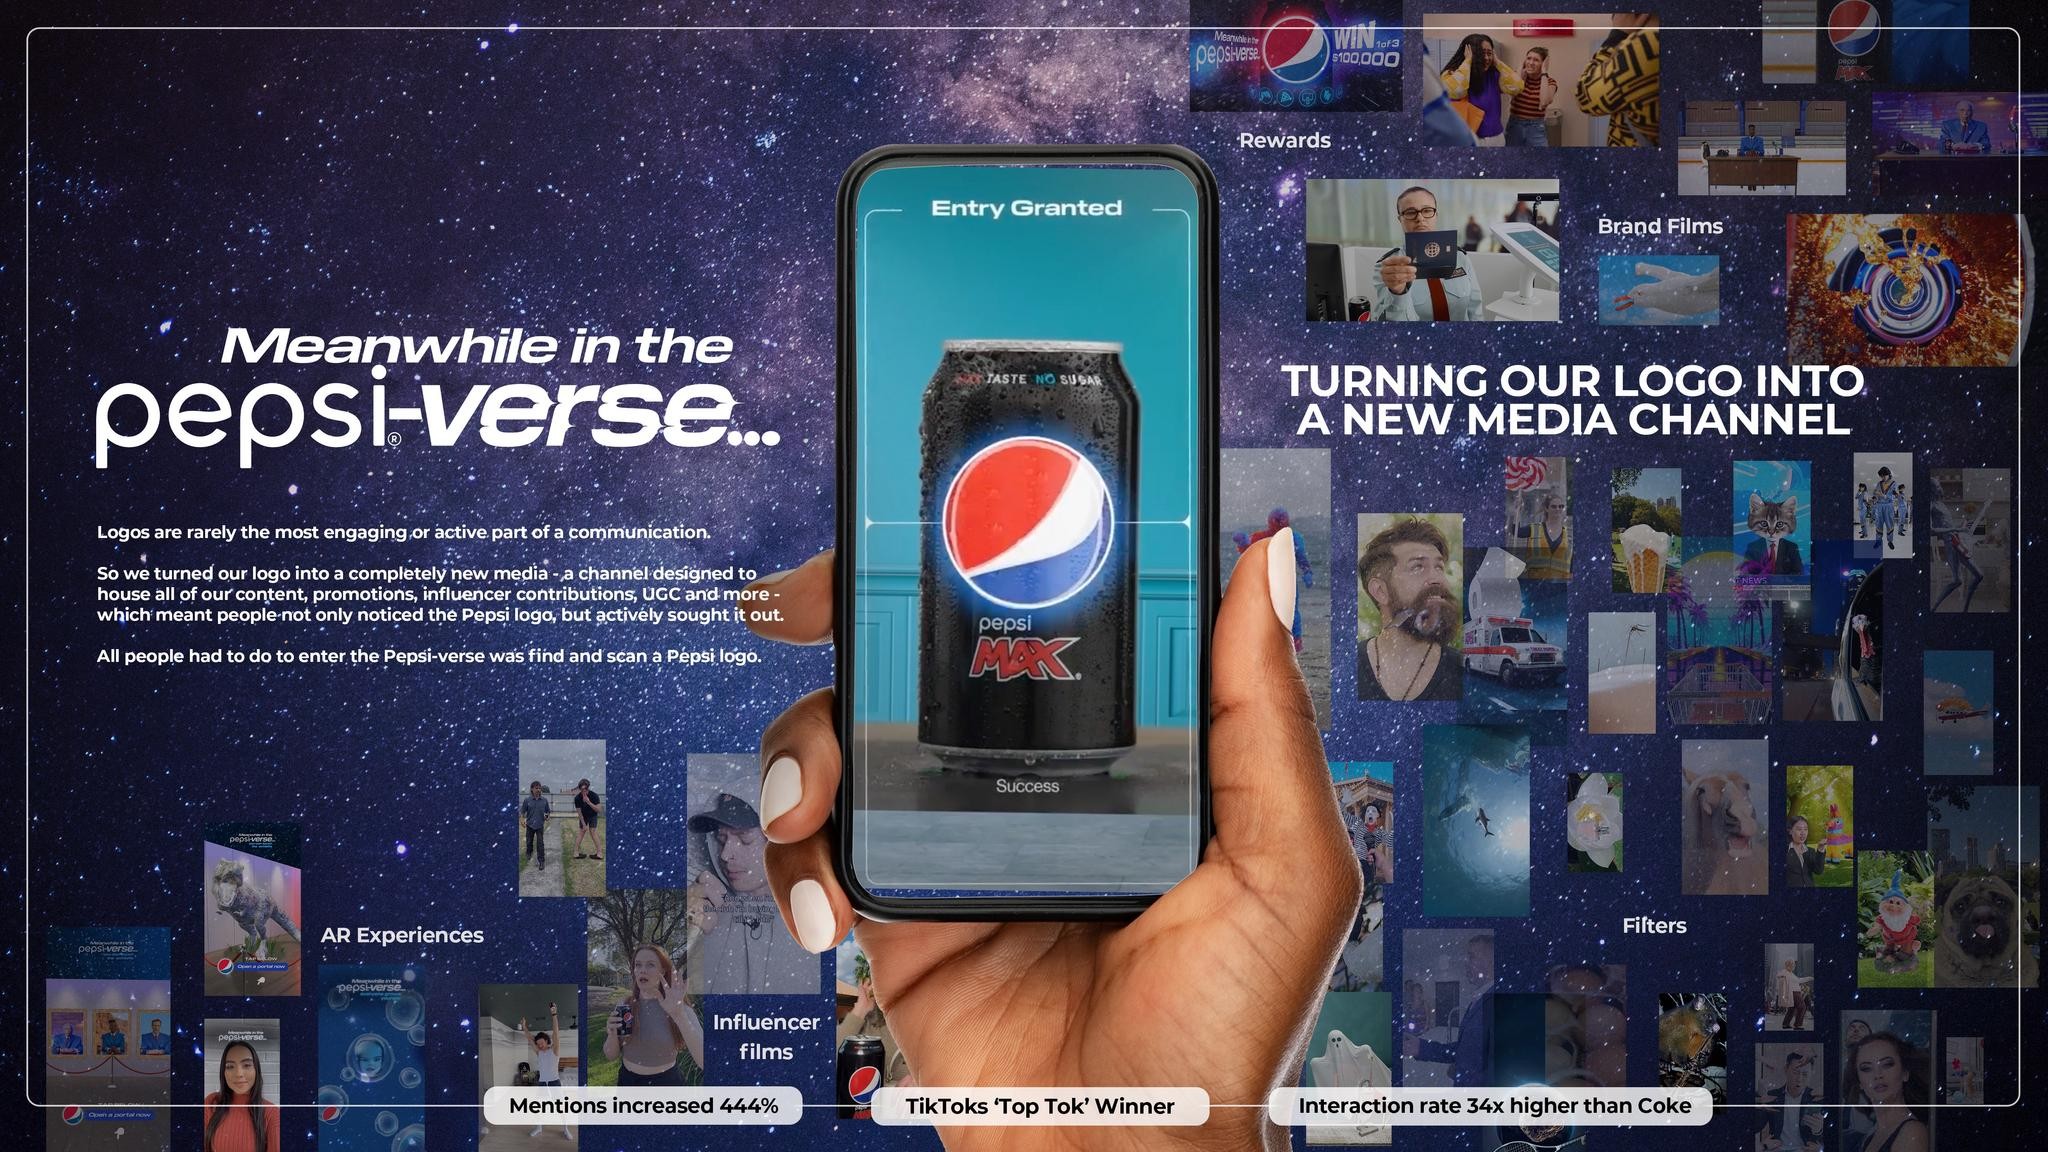 Meanwhile in the Pepsi-verse